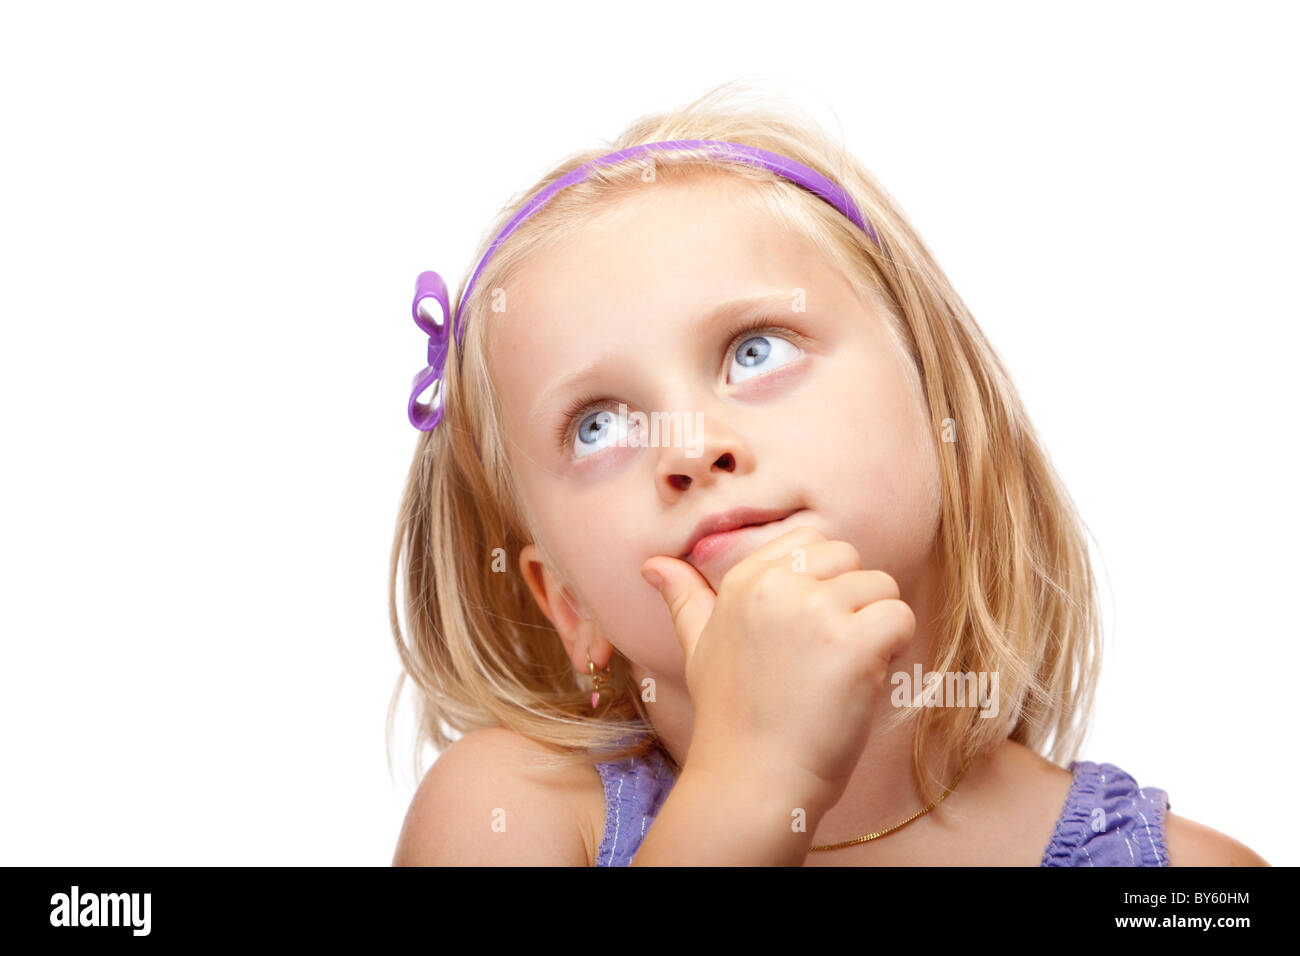 Contemplative young girl  looks up. Isolated on white background. Stock Photo